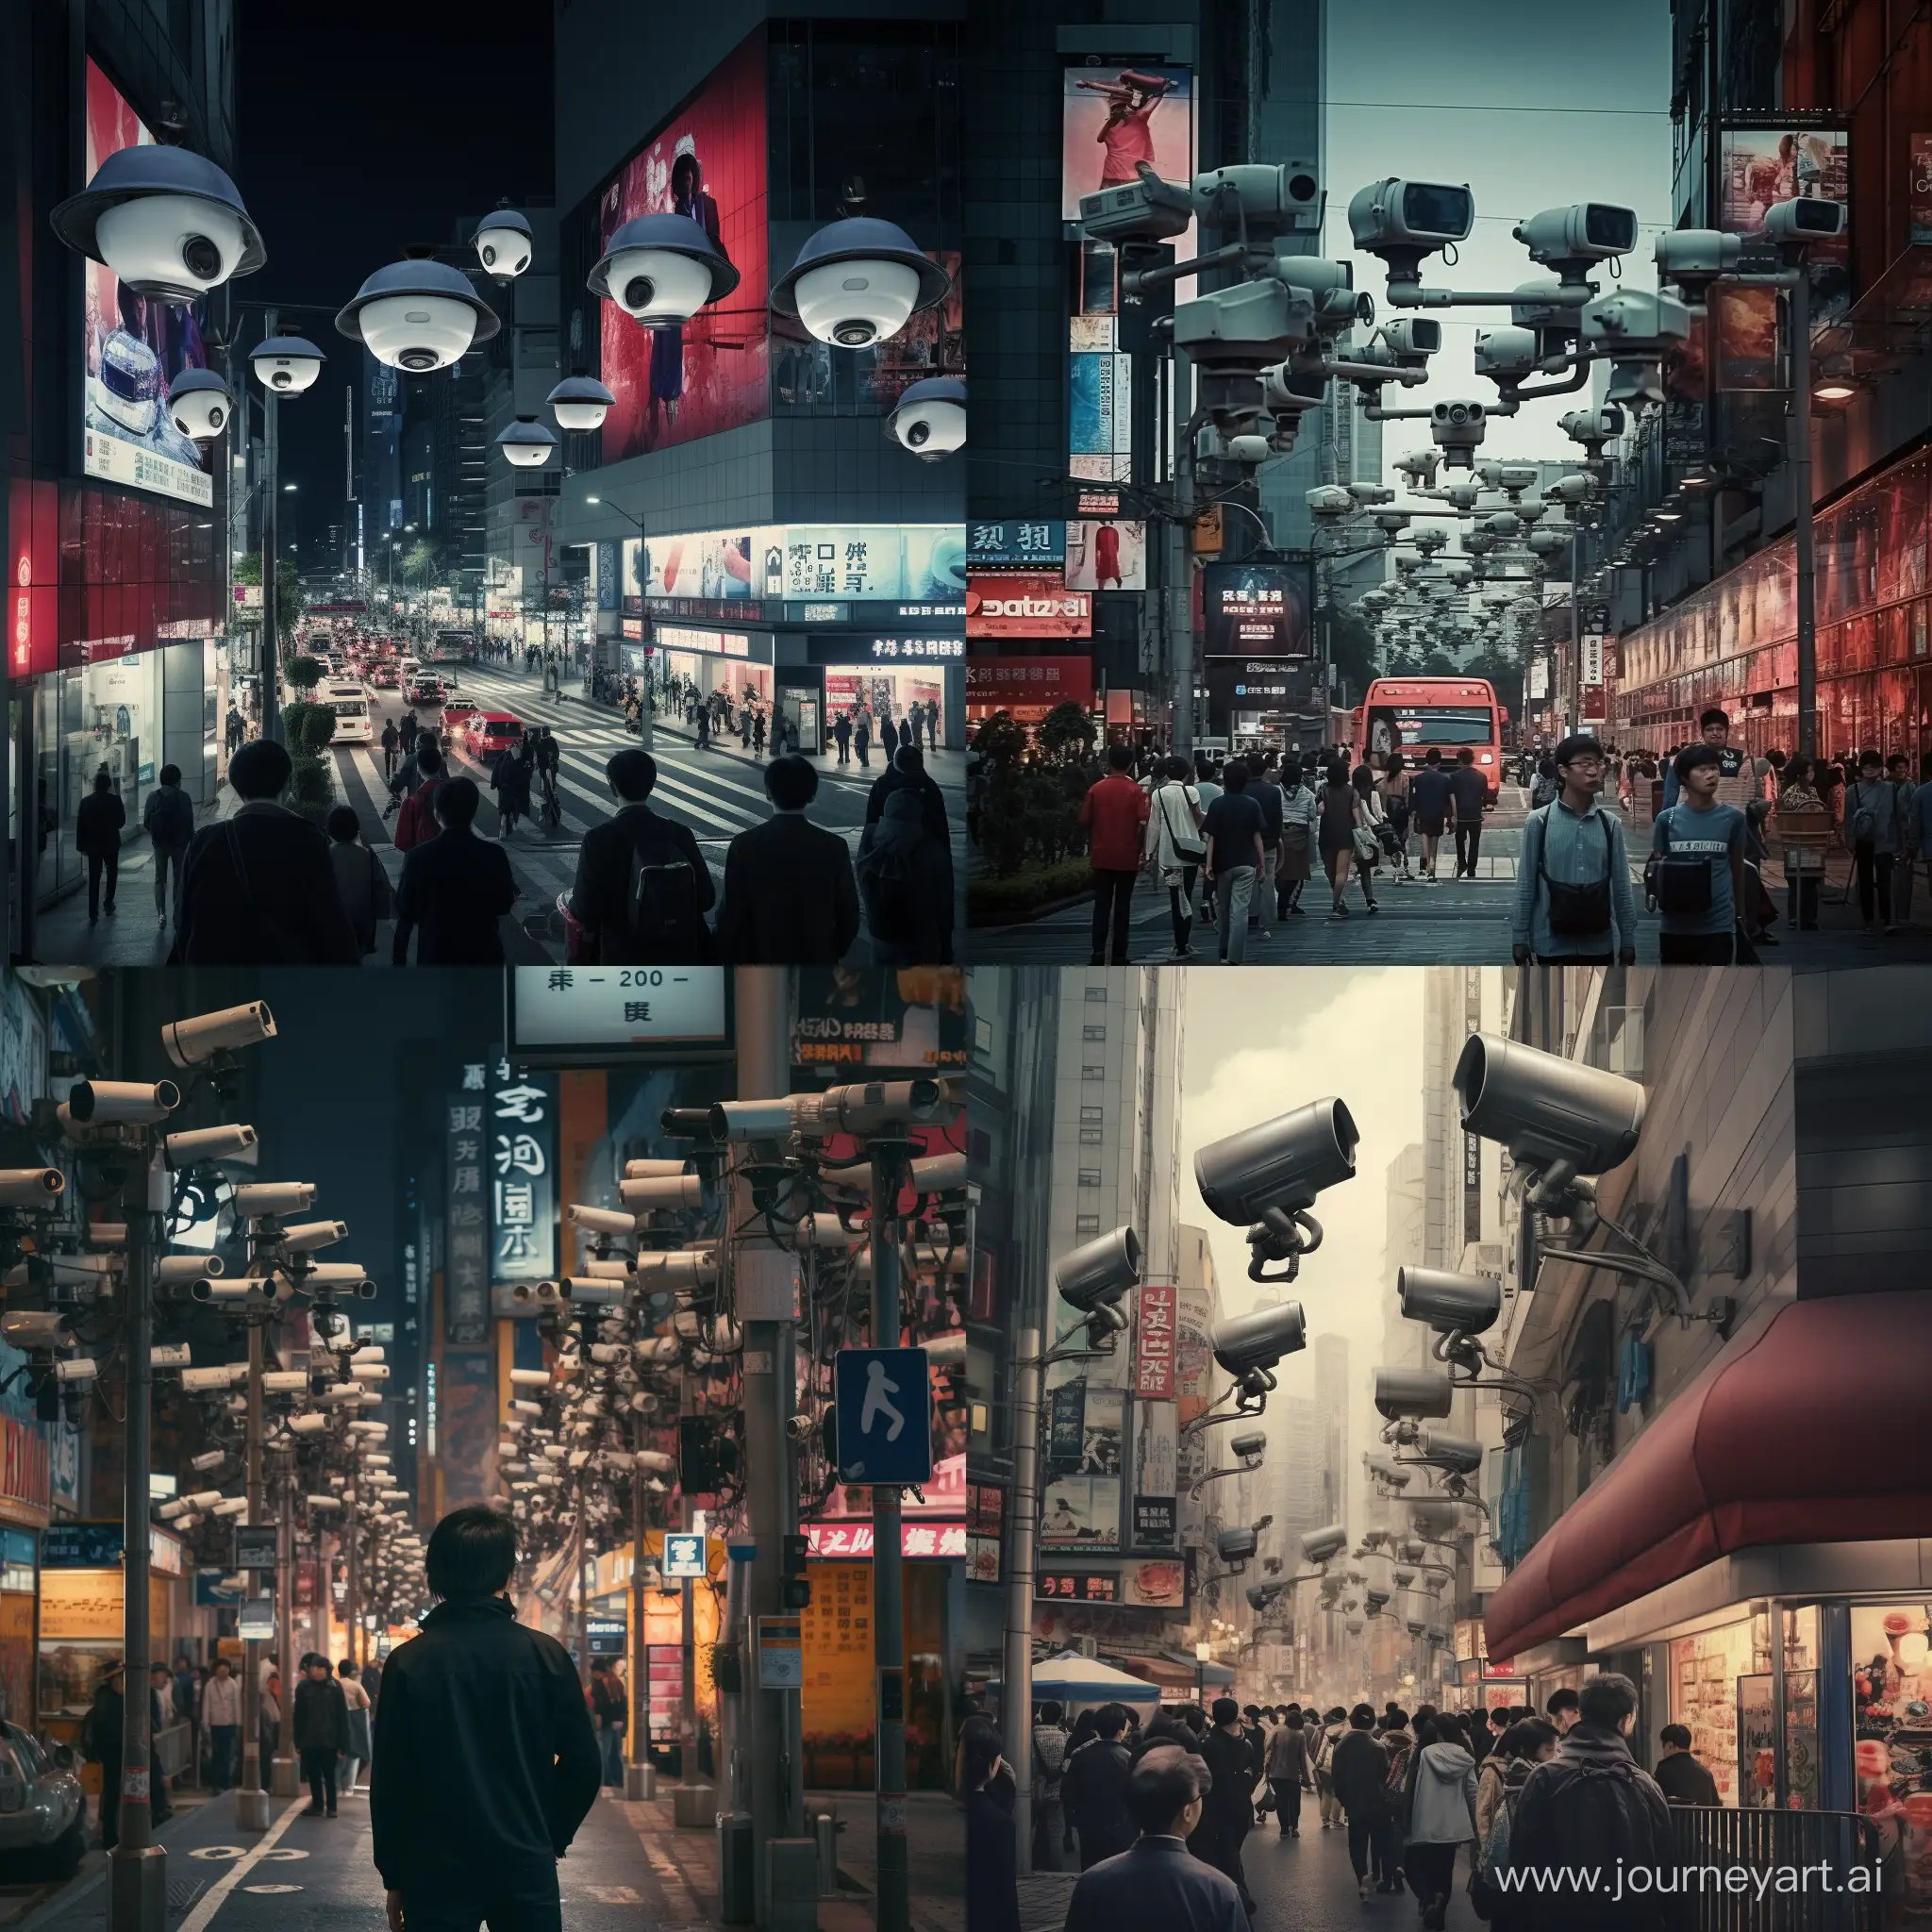 Vibrant-Life-in-East-Asia-Busy-Street-Scenes-Captured-by-CCTV